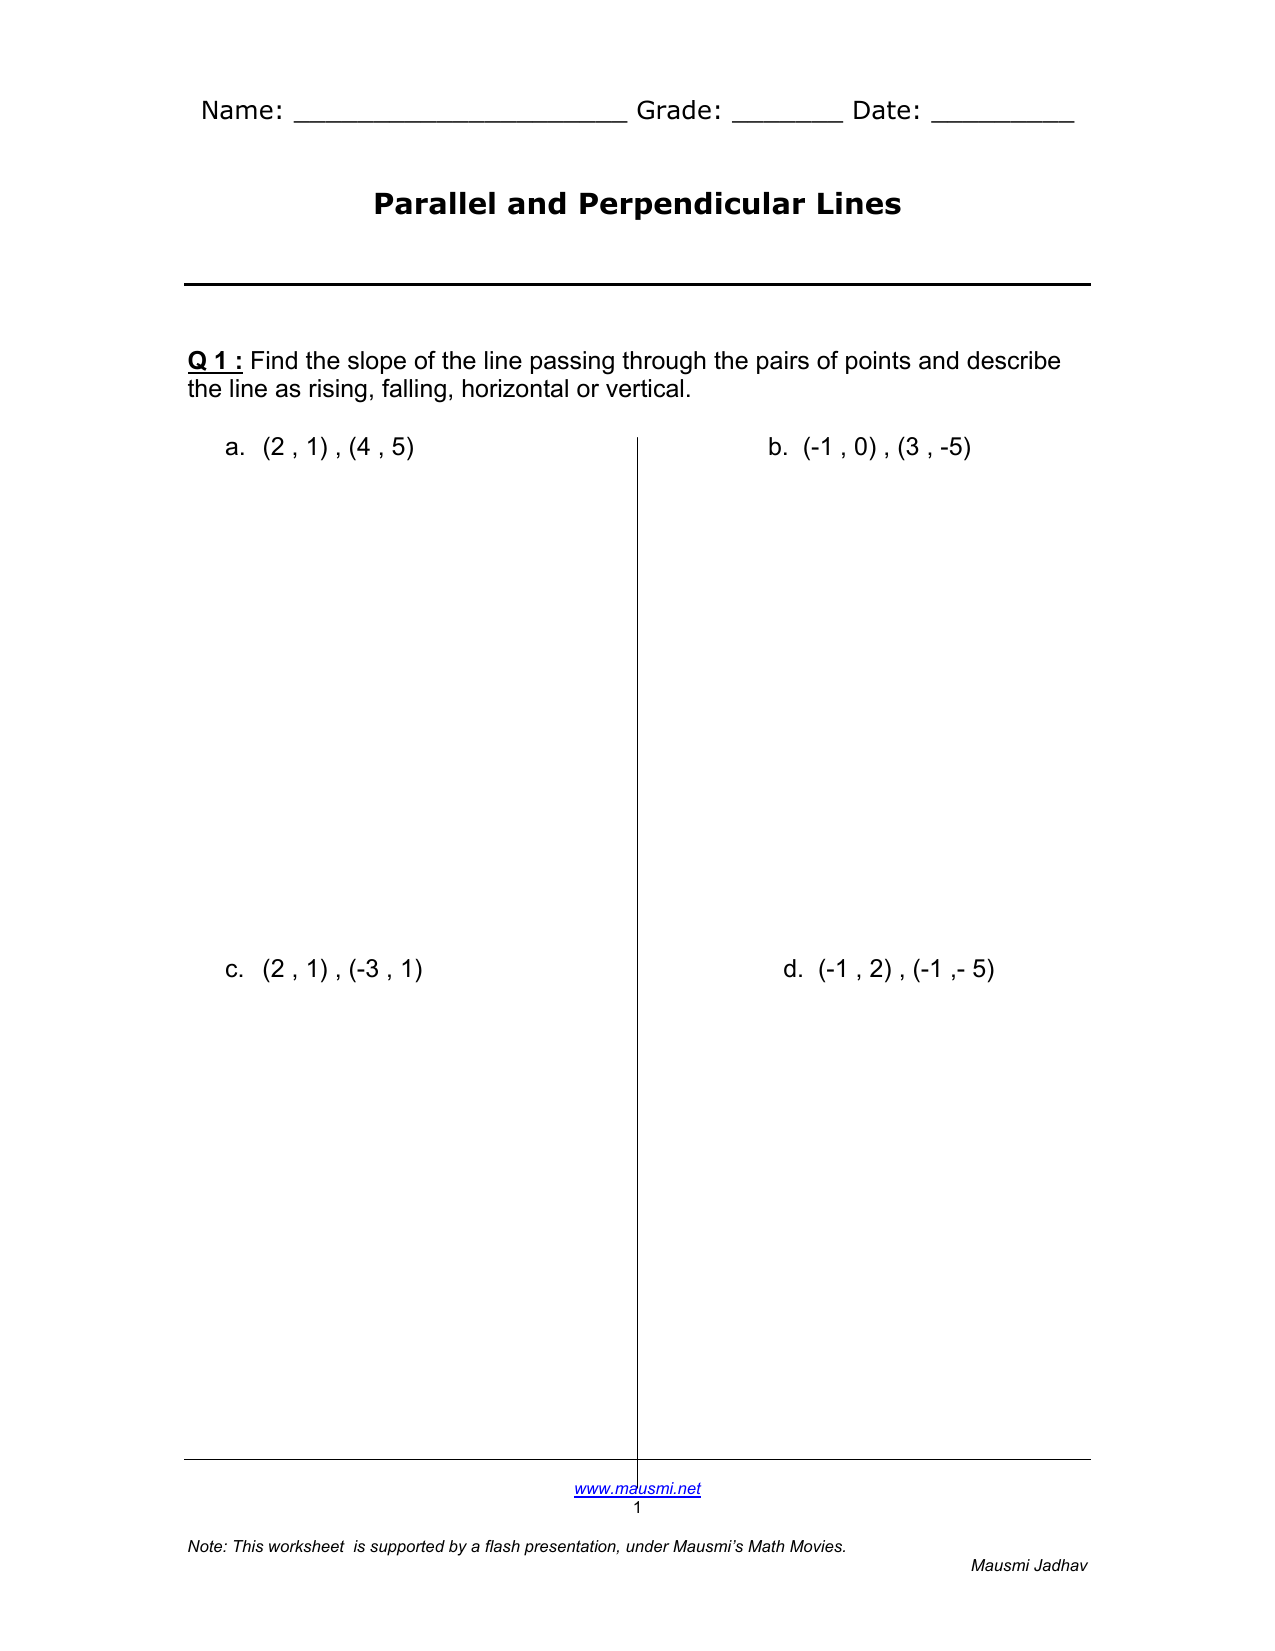 Parallel+and+Perpendicular+lines With Parallel And Perpendicular Lines Worksheet